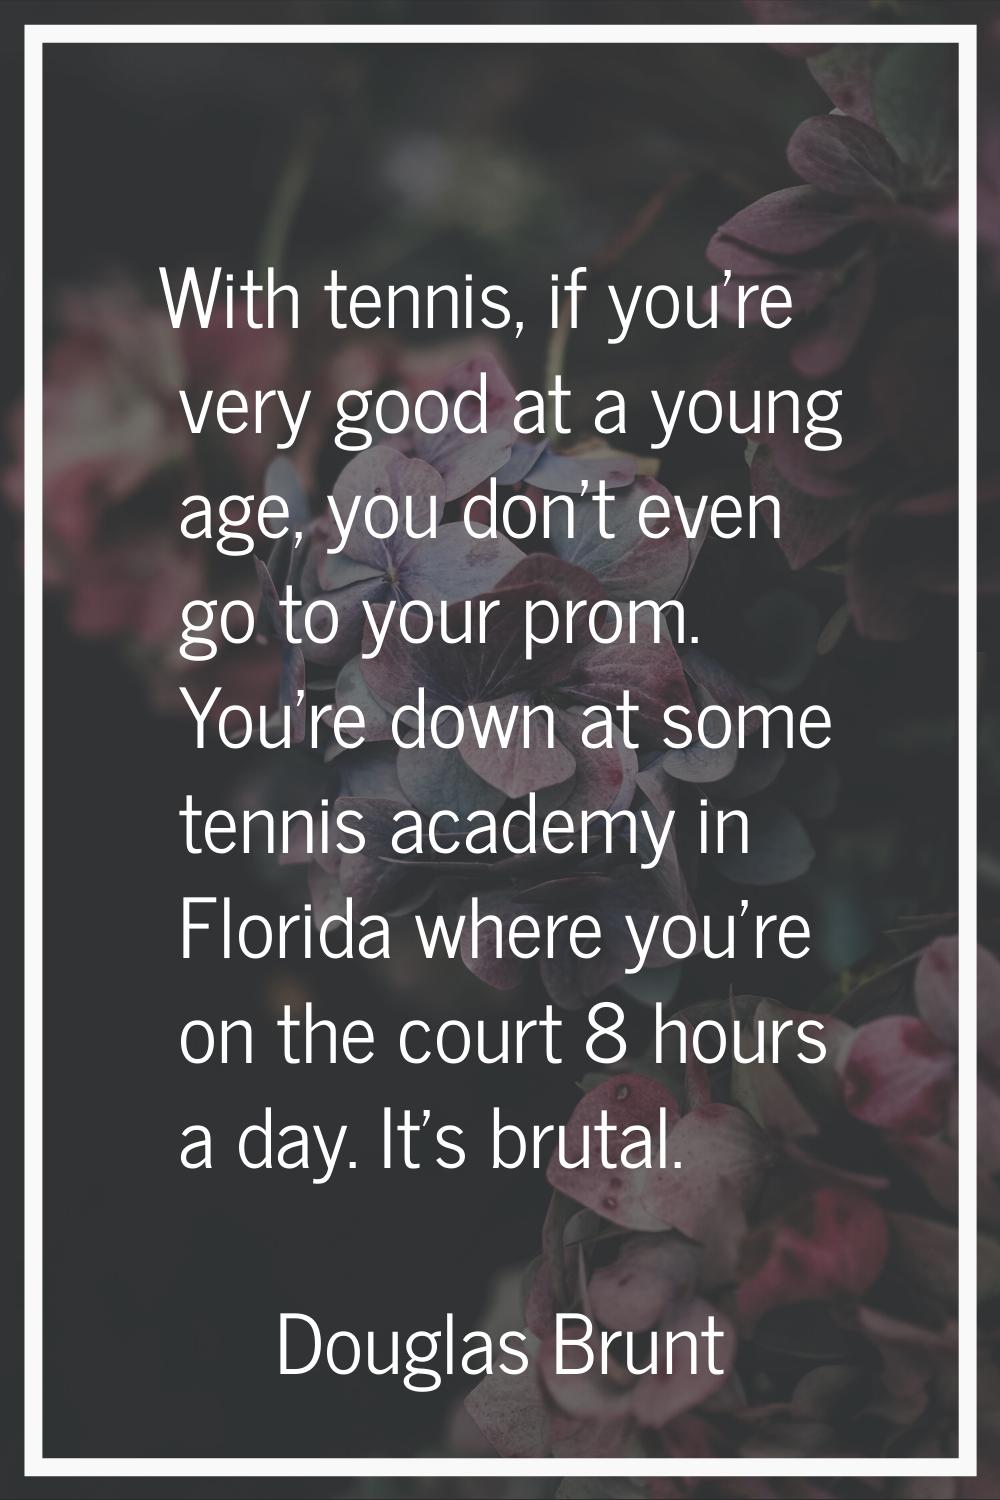 With tennis, if you're very good at a young age, you don't even go to your prom. You're down at som